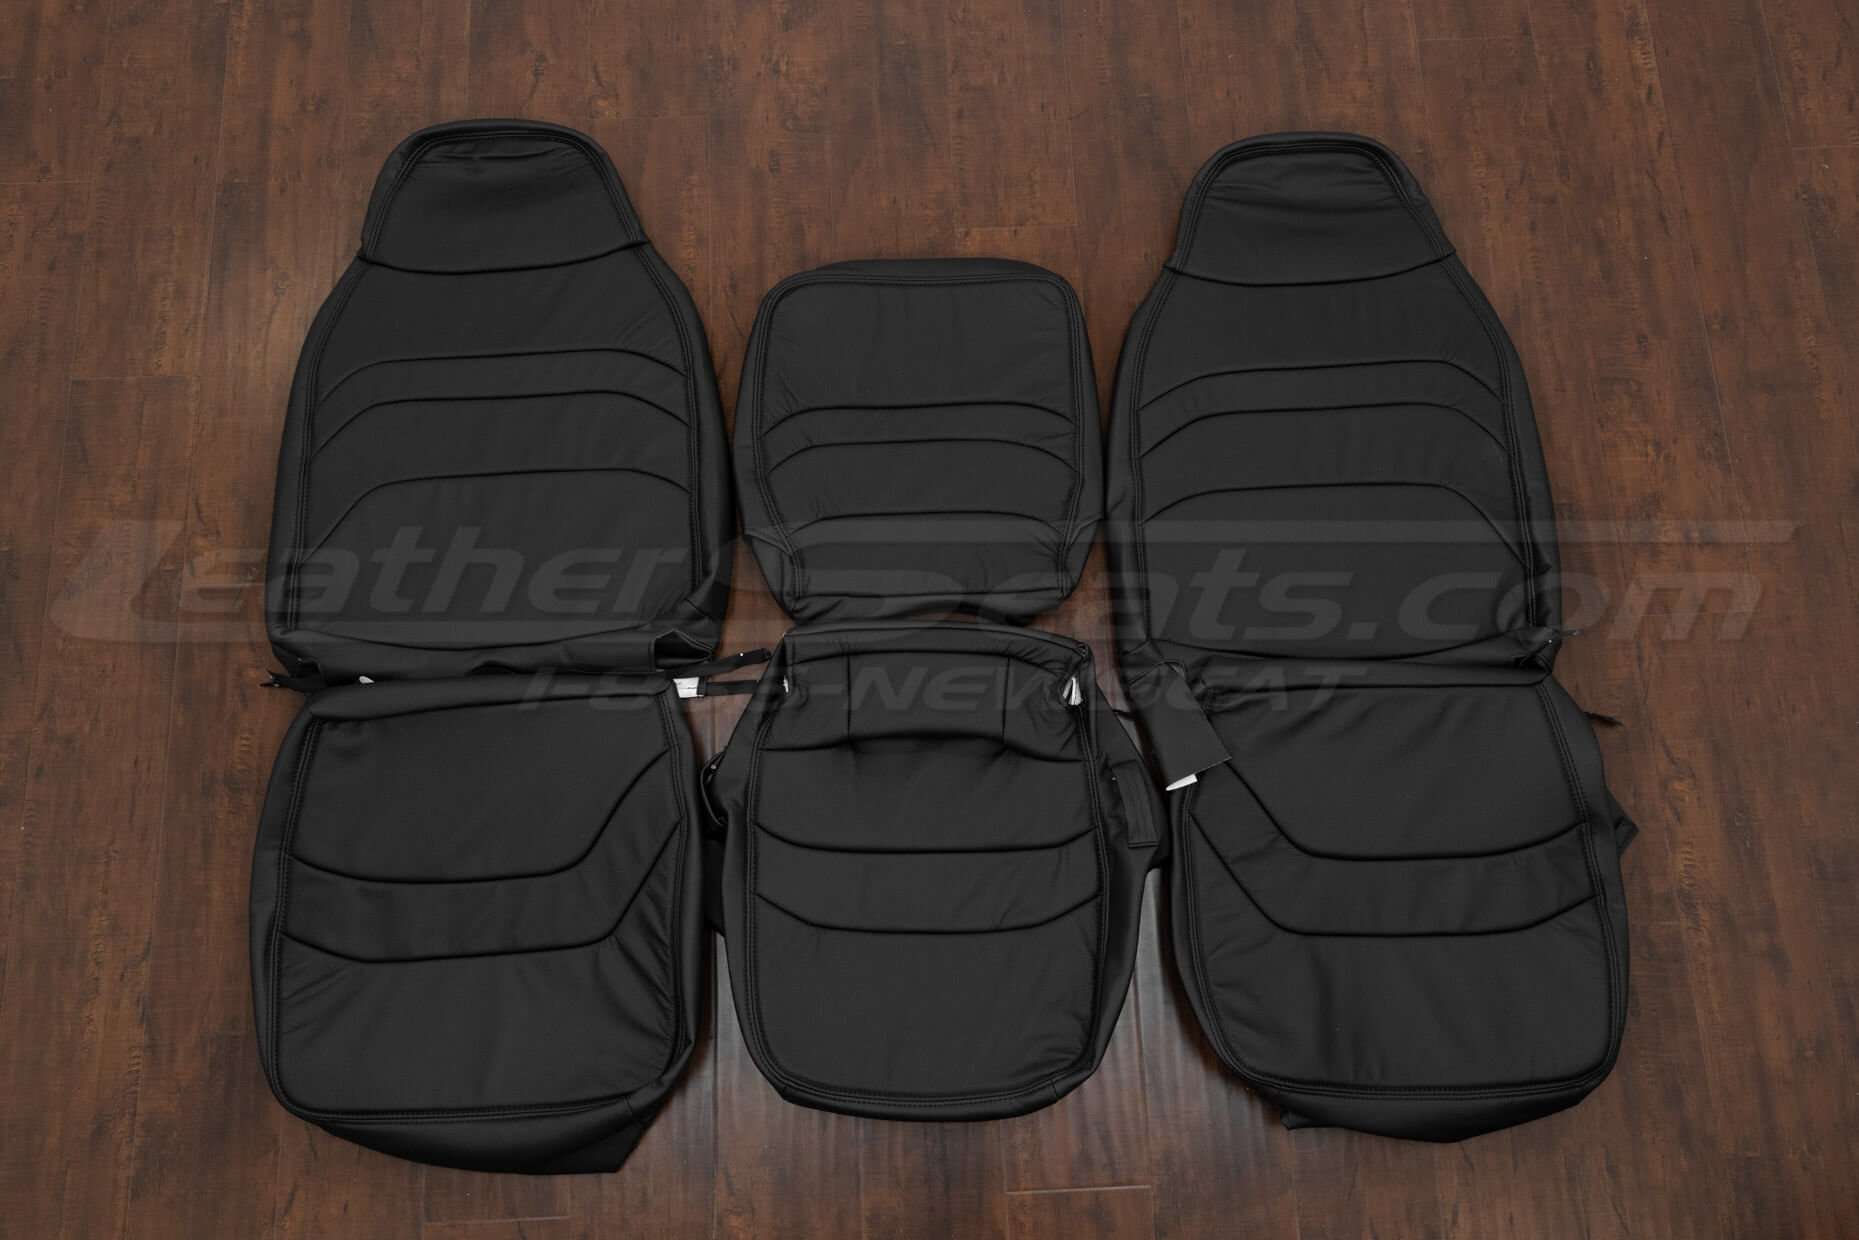 Ford Superduty Leather Seat Kit - Black - Front seat upholstery